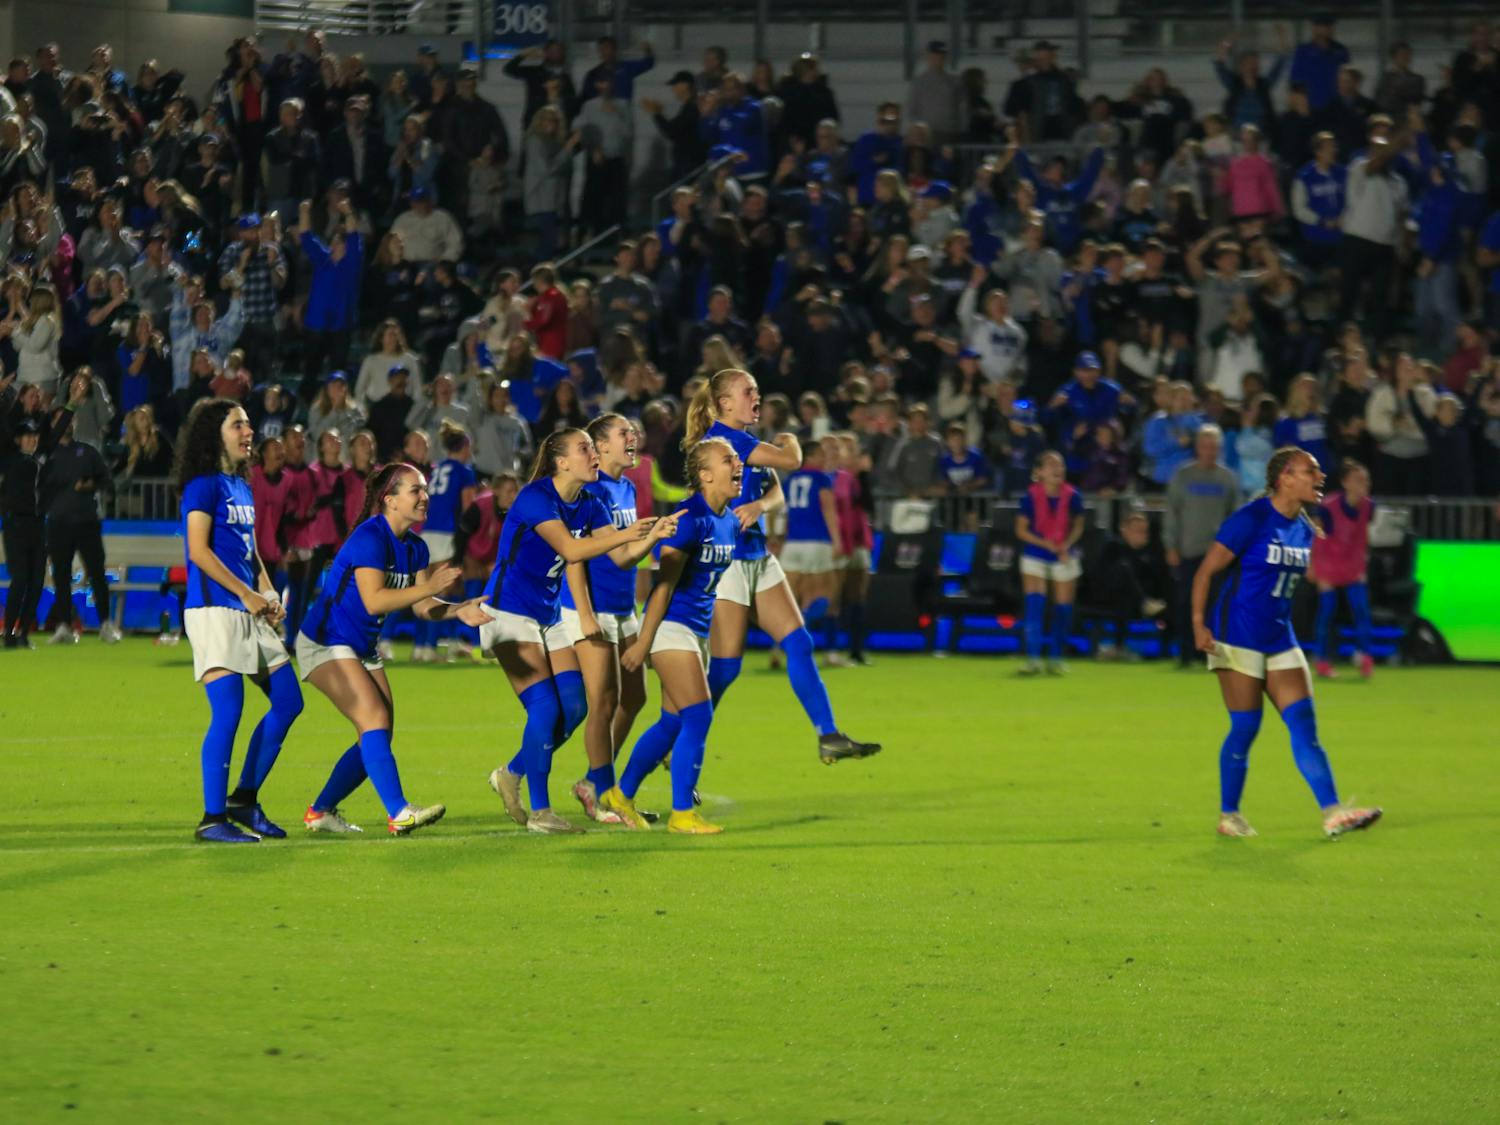 Duke celebrates during a thrilling loss in penalties to North Carolina at the ACC tournament in Cary, N.C.